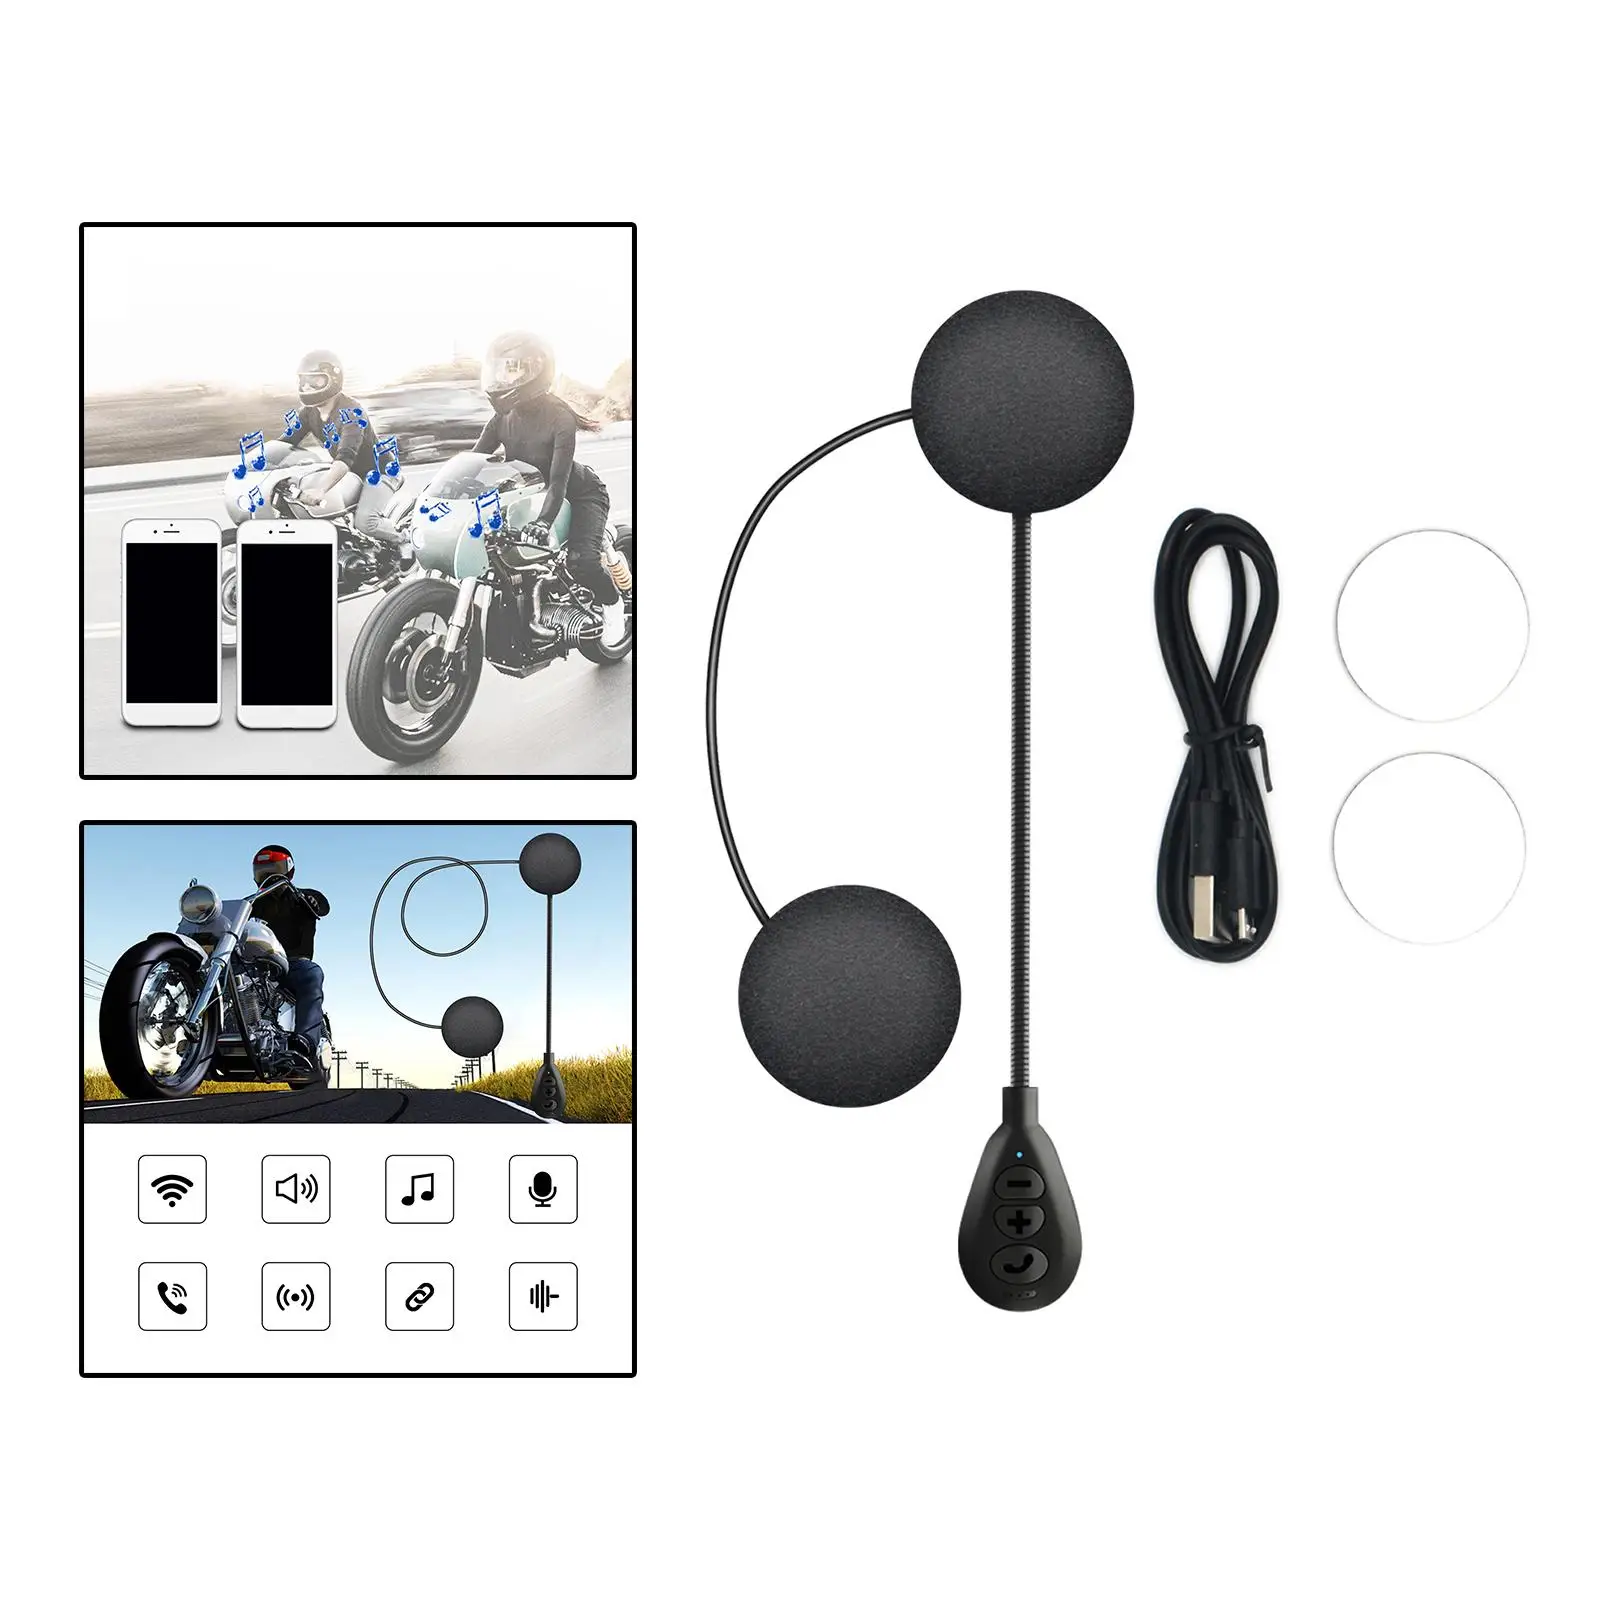 Motorcycle Bluetooth Helmet Headset Stereo  up   Riding